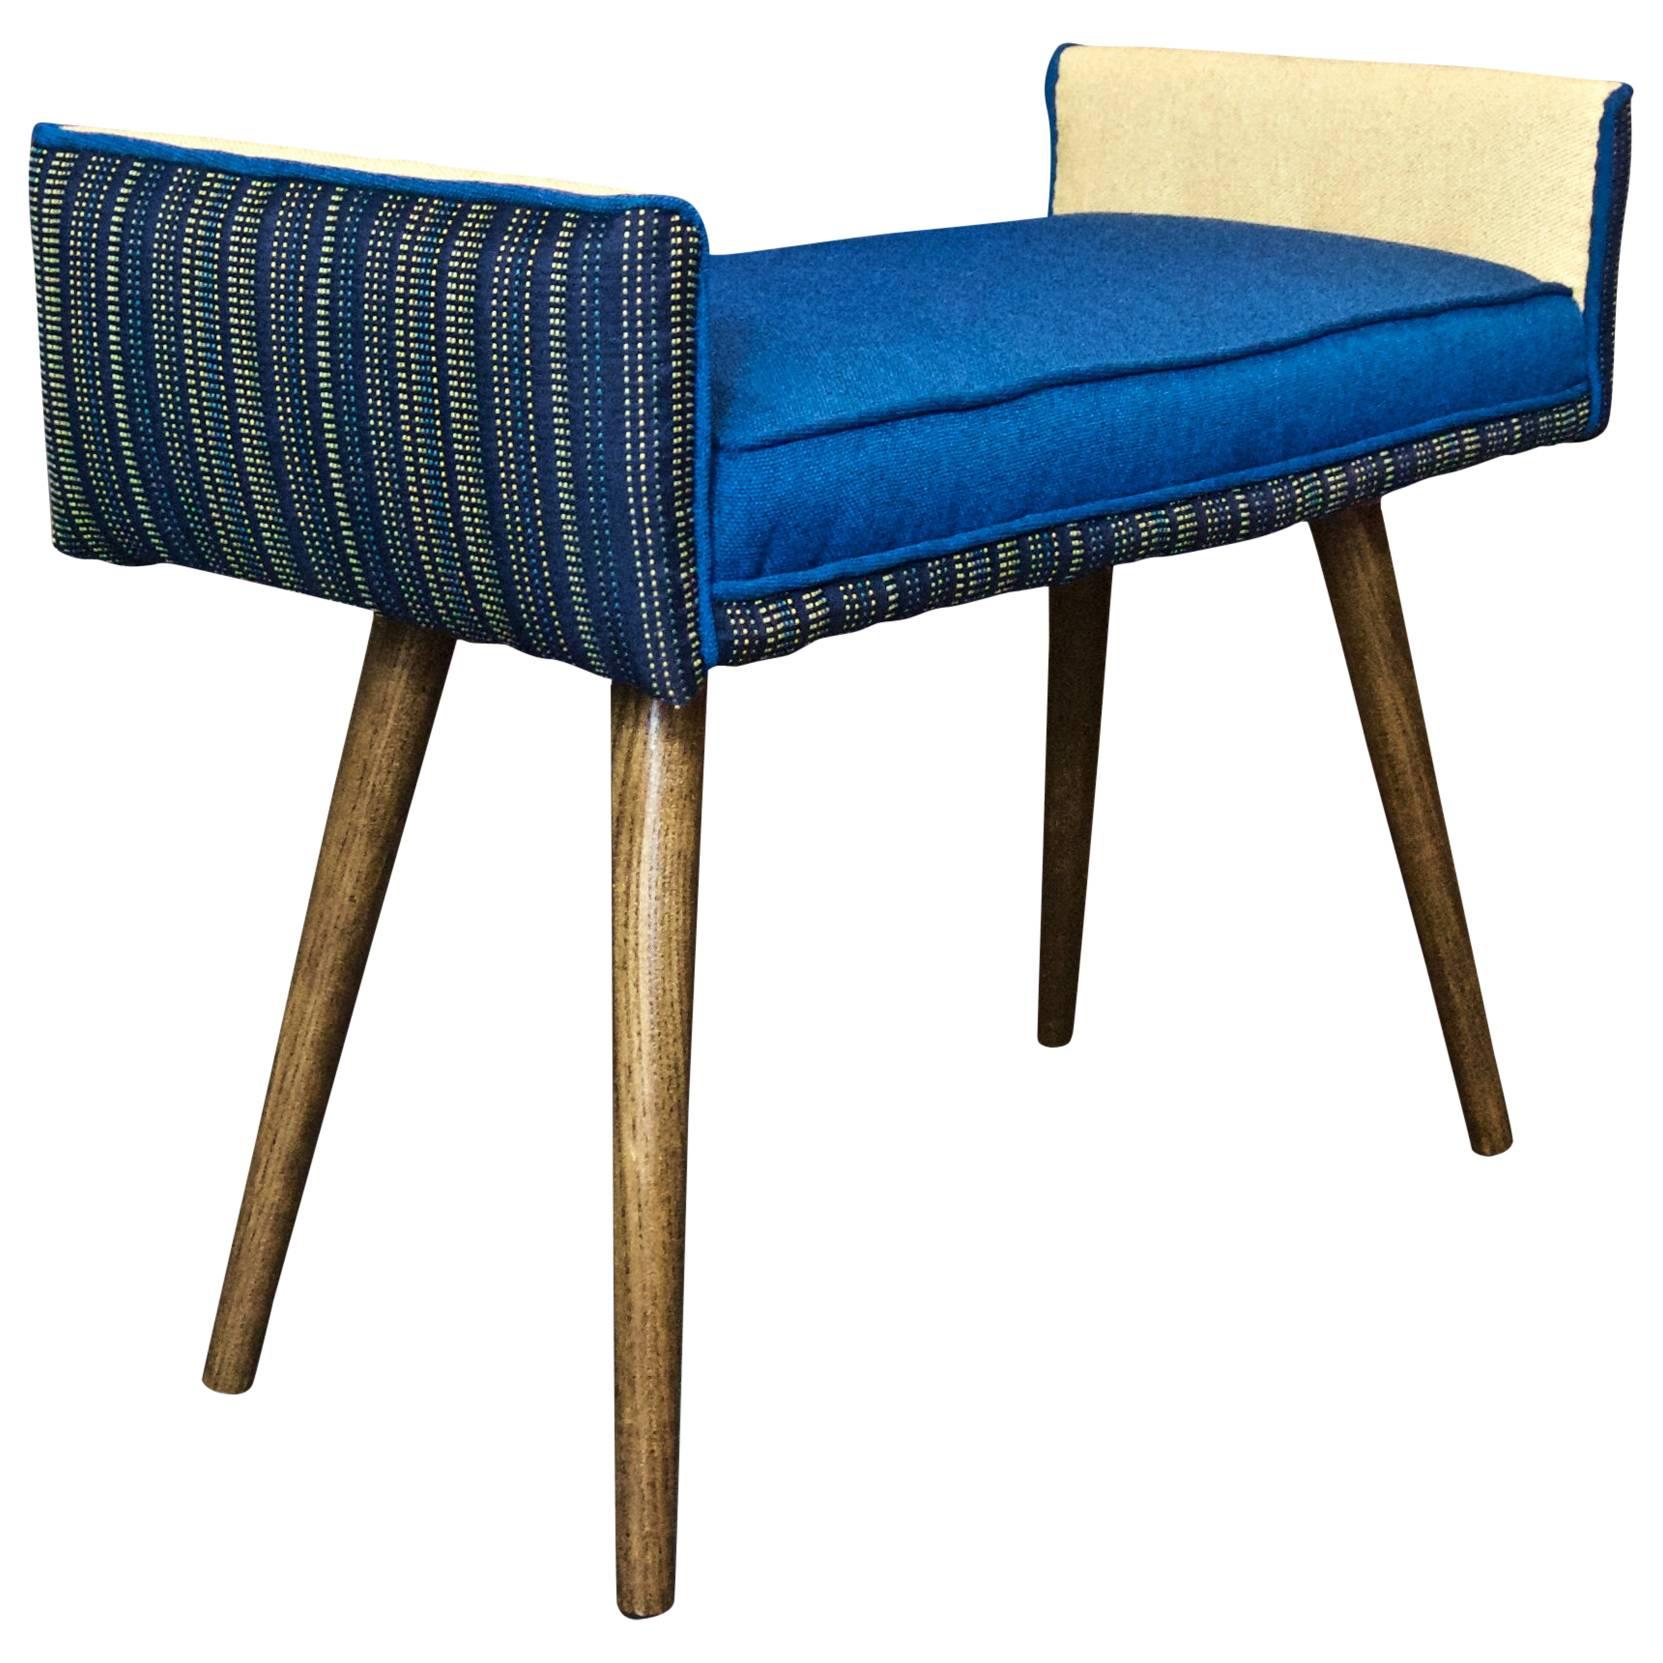 Studio Series: Backless Vanity Size Stool in Navy Pinstripe, Blue Seat-in stock For Sale